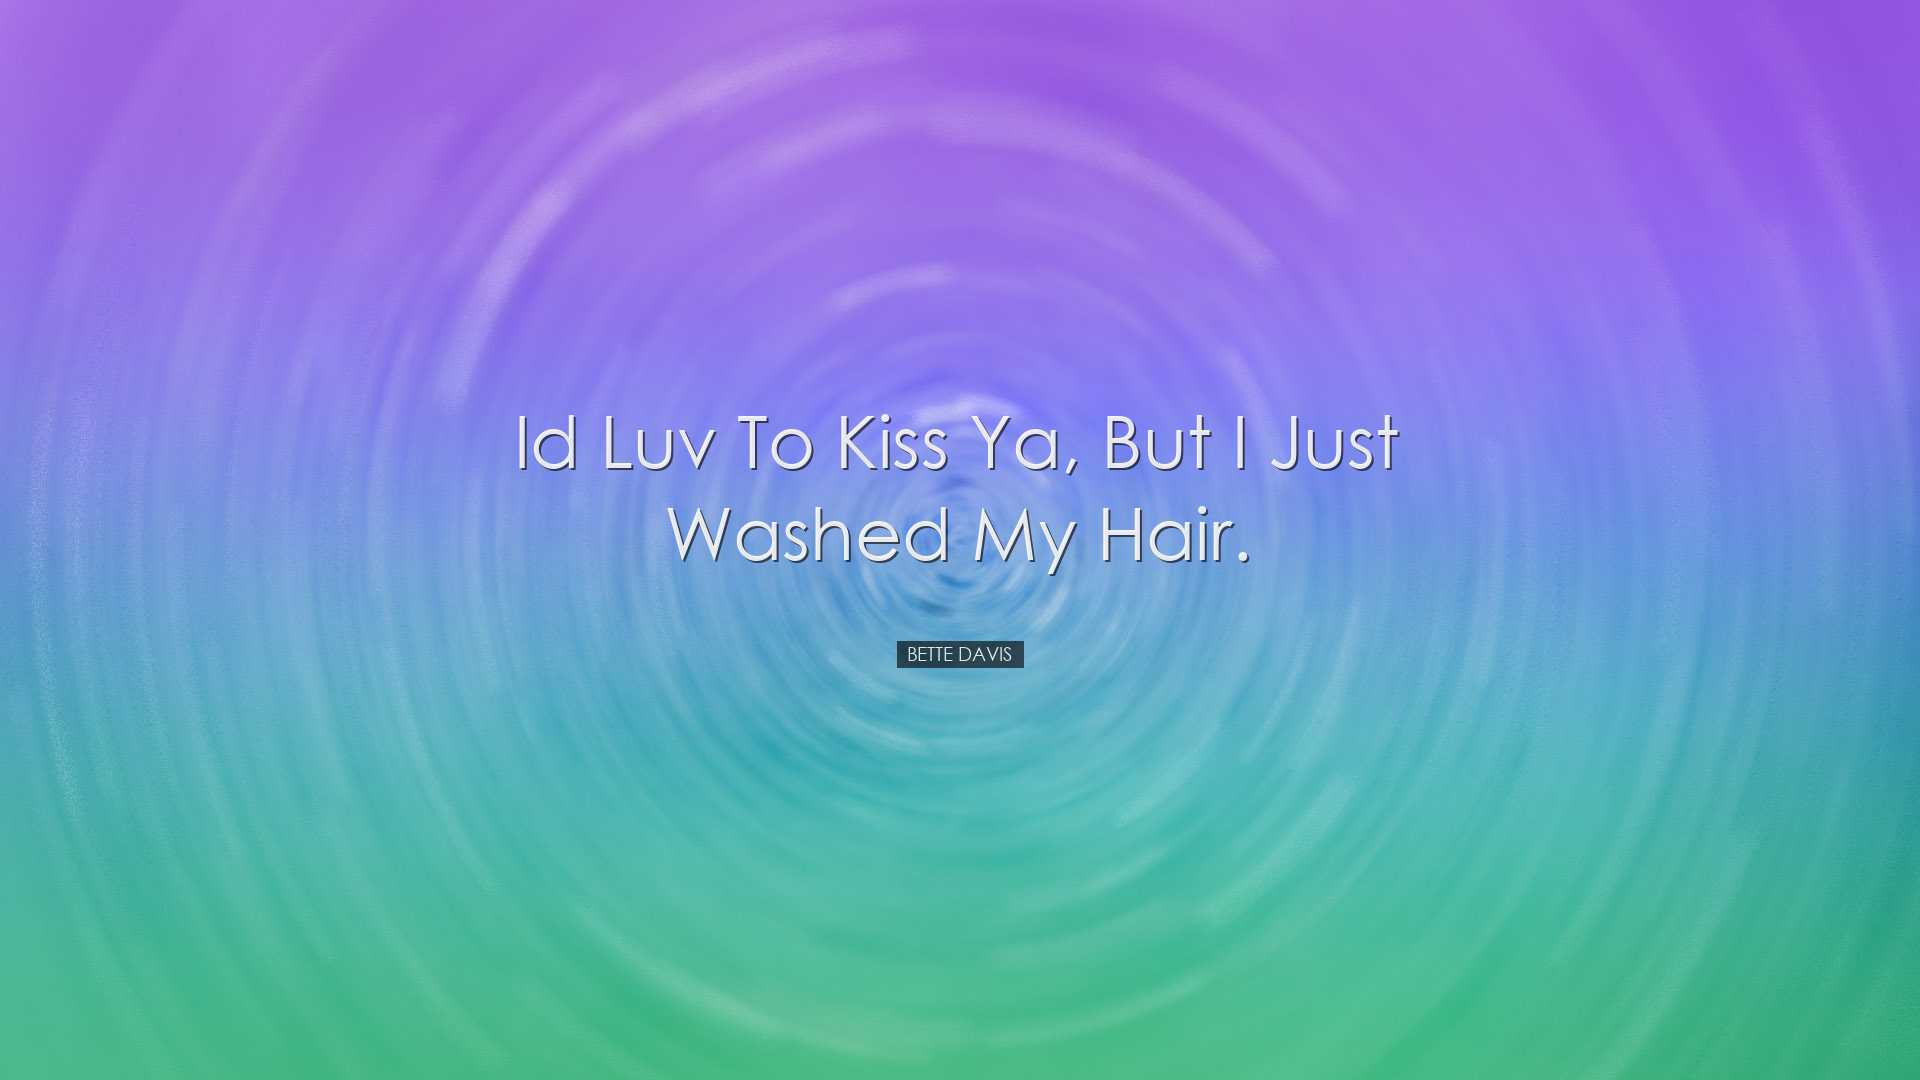 Id luv to kiss ya, but I just washed my hair. - Bette Davis